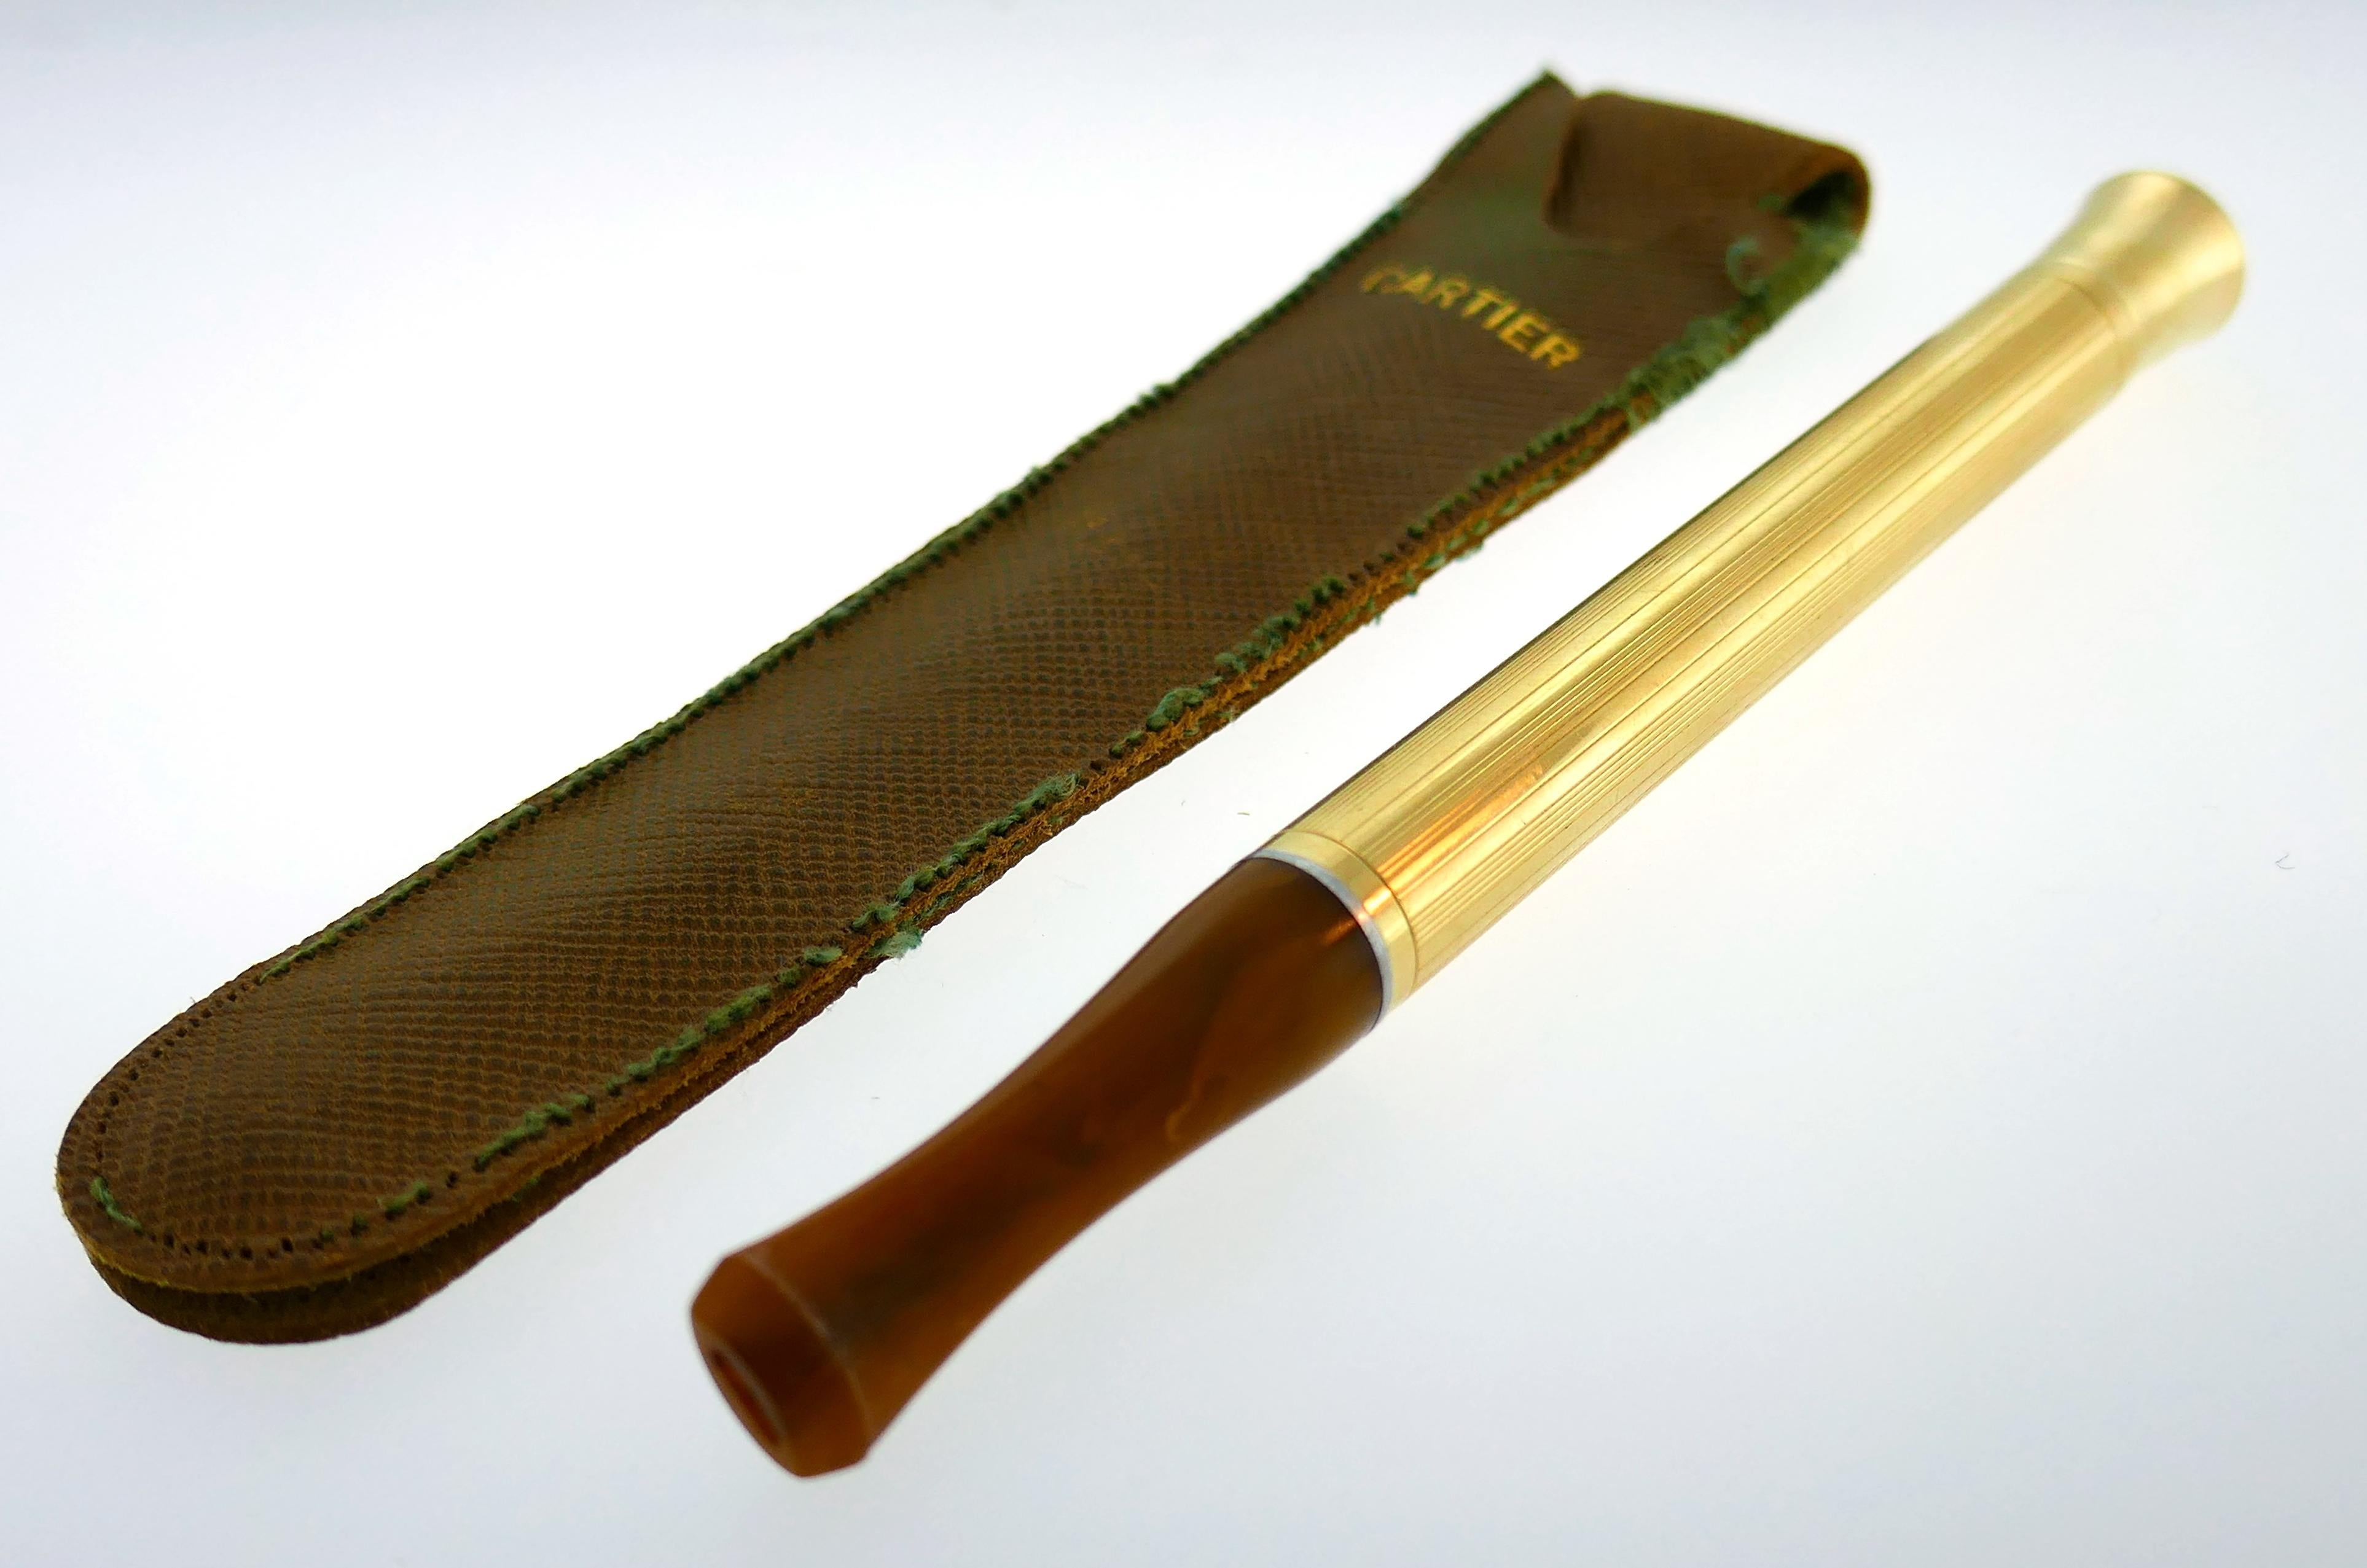 Chic cigarette holder created by Cartier in the 1940s.
it is made of 14 karat (stamped) yellow gold and Bakelite. 
The cigarette holder measures 5 x 3/8 inches, the Bakelite part measures 1-1/2 x 3/8 inches. Weight 14.9 grams.
The cigarette holder